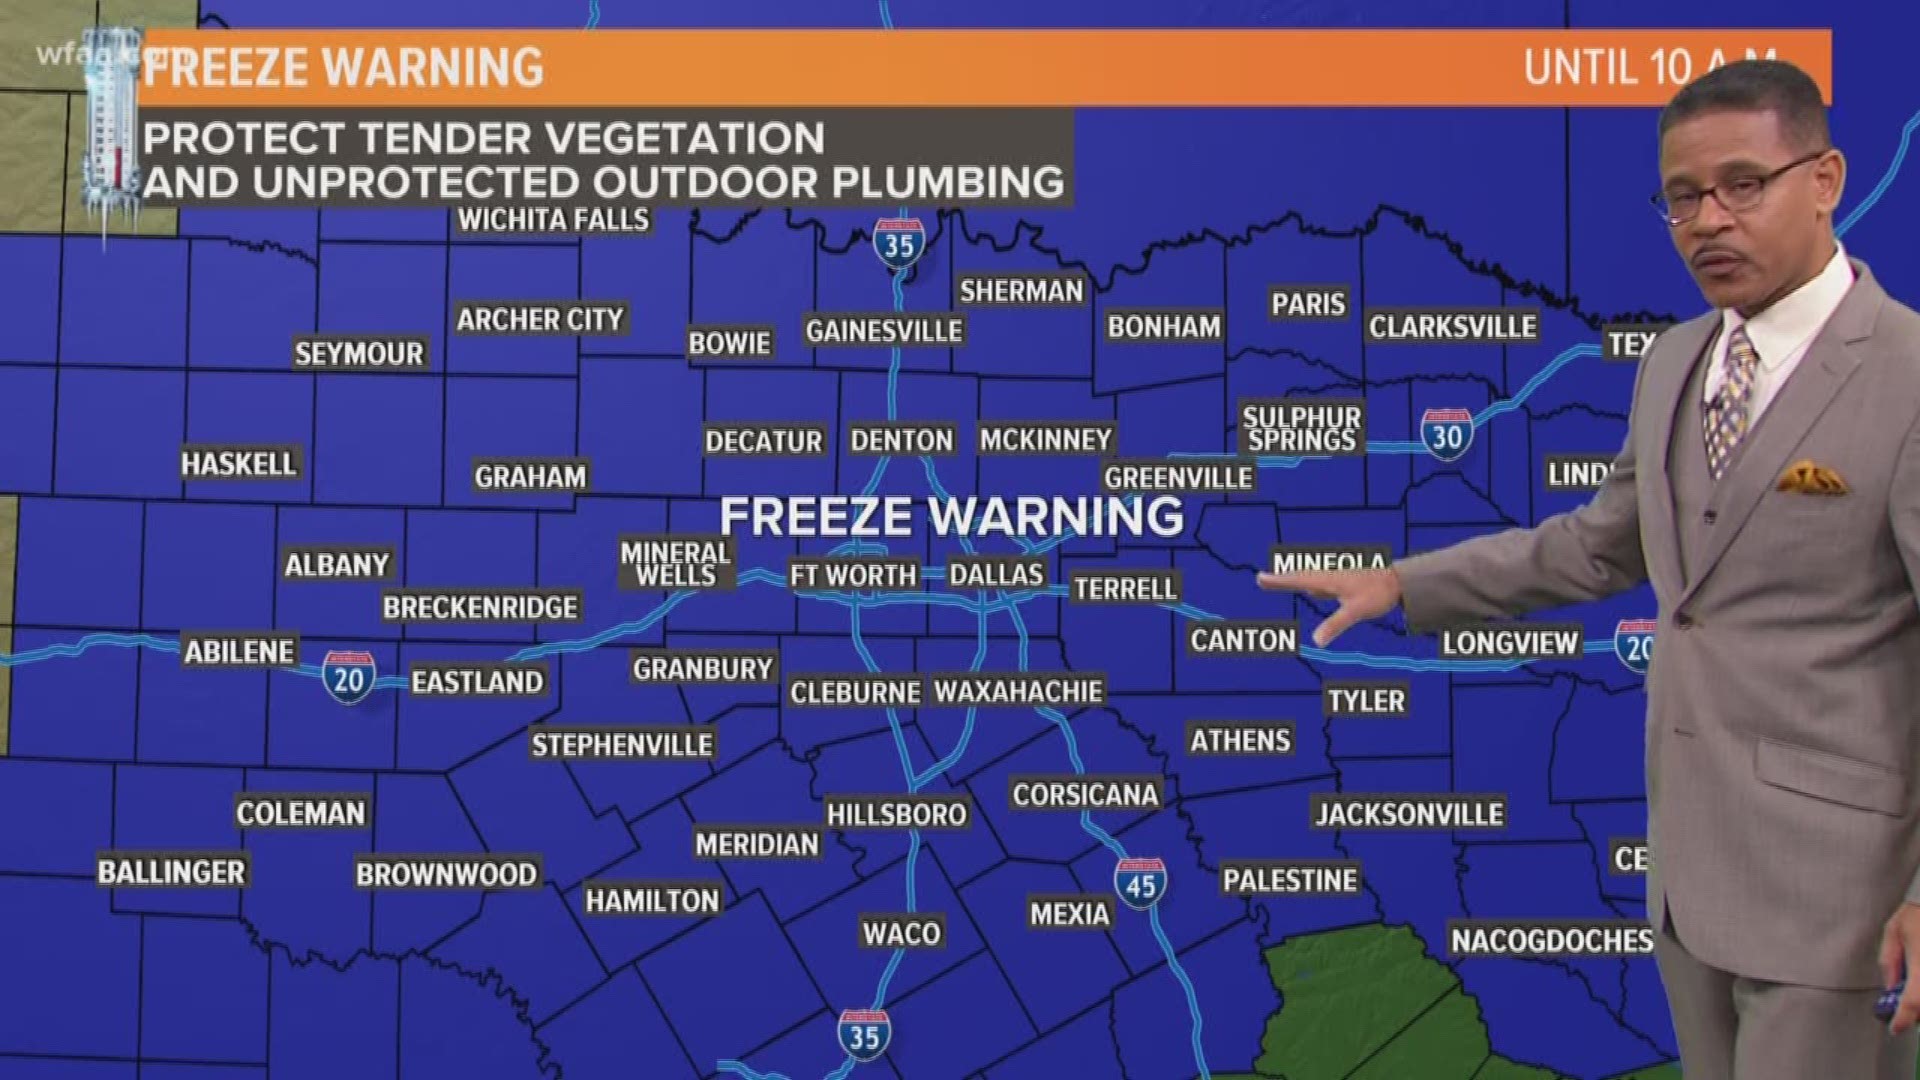 It may be Halloween, but it's freezing in Dallas-Fort Worth already-literally!